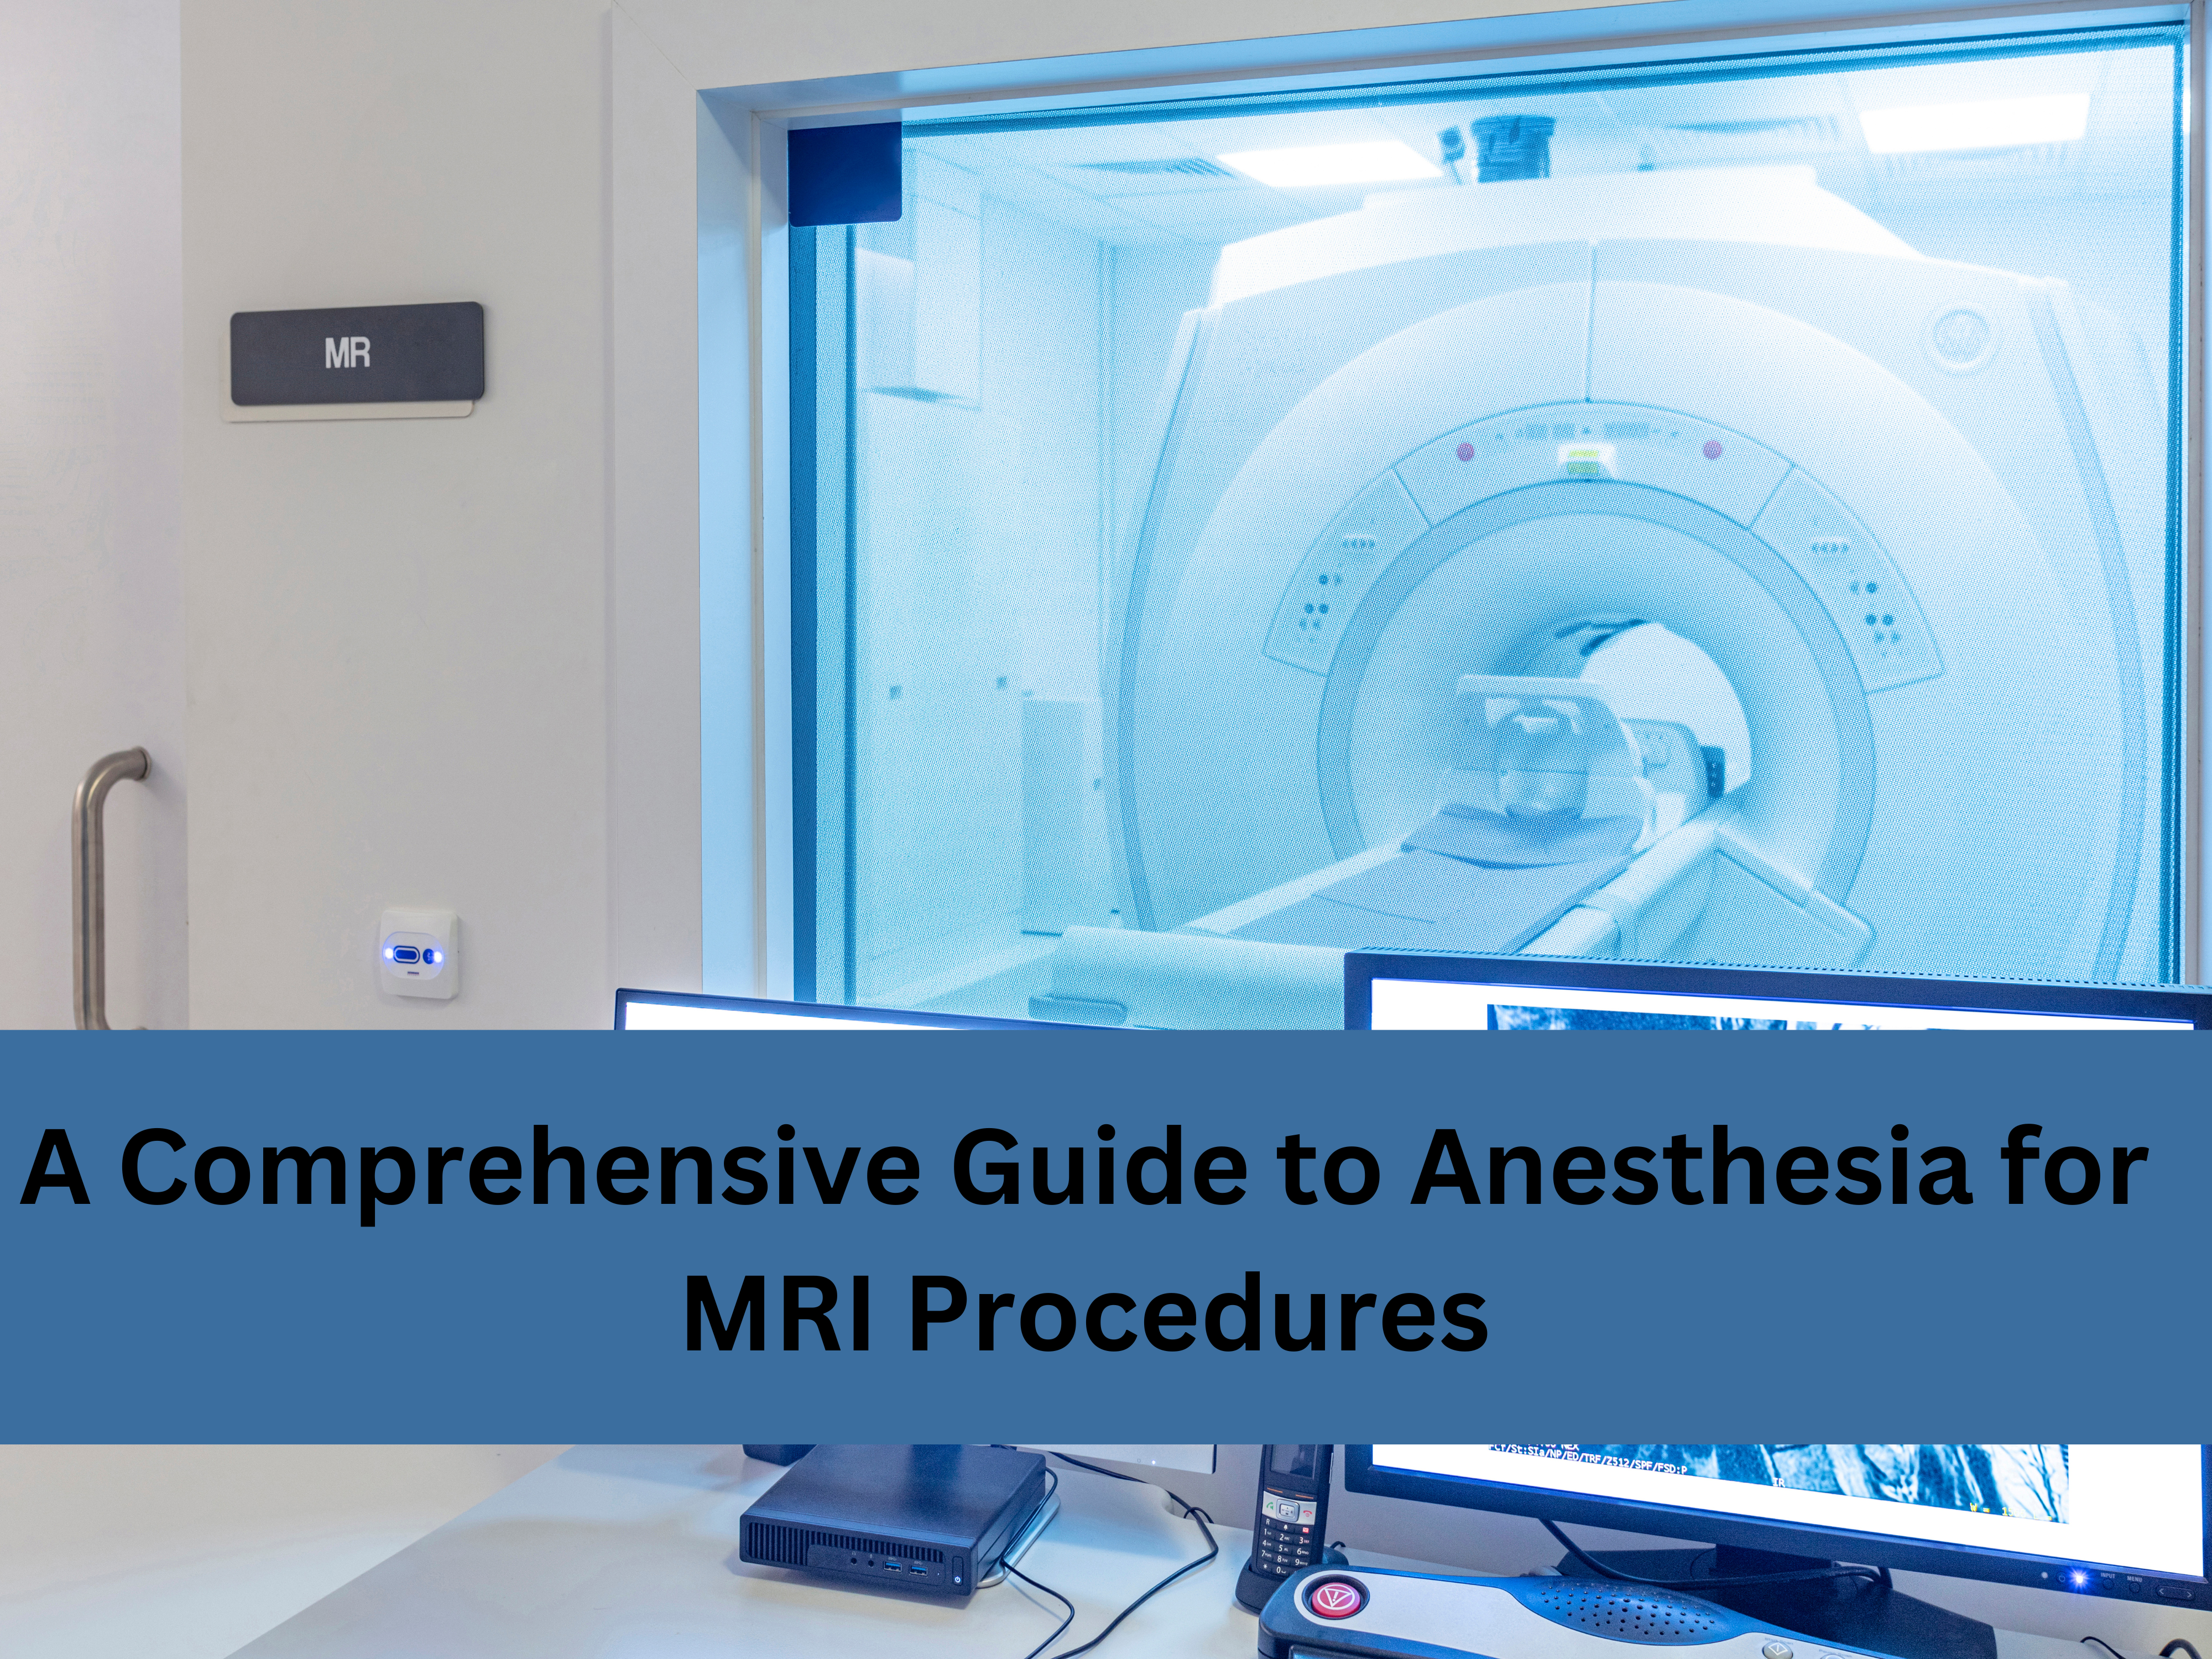 A Comprehensive Guide to Anesthesia for MRI Procedures